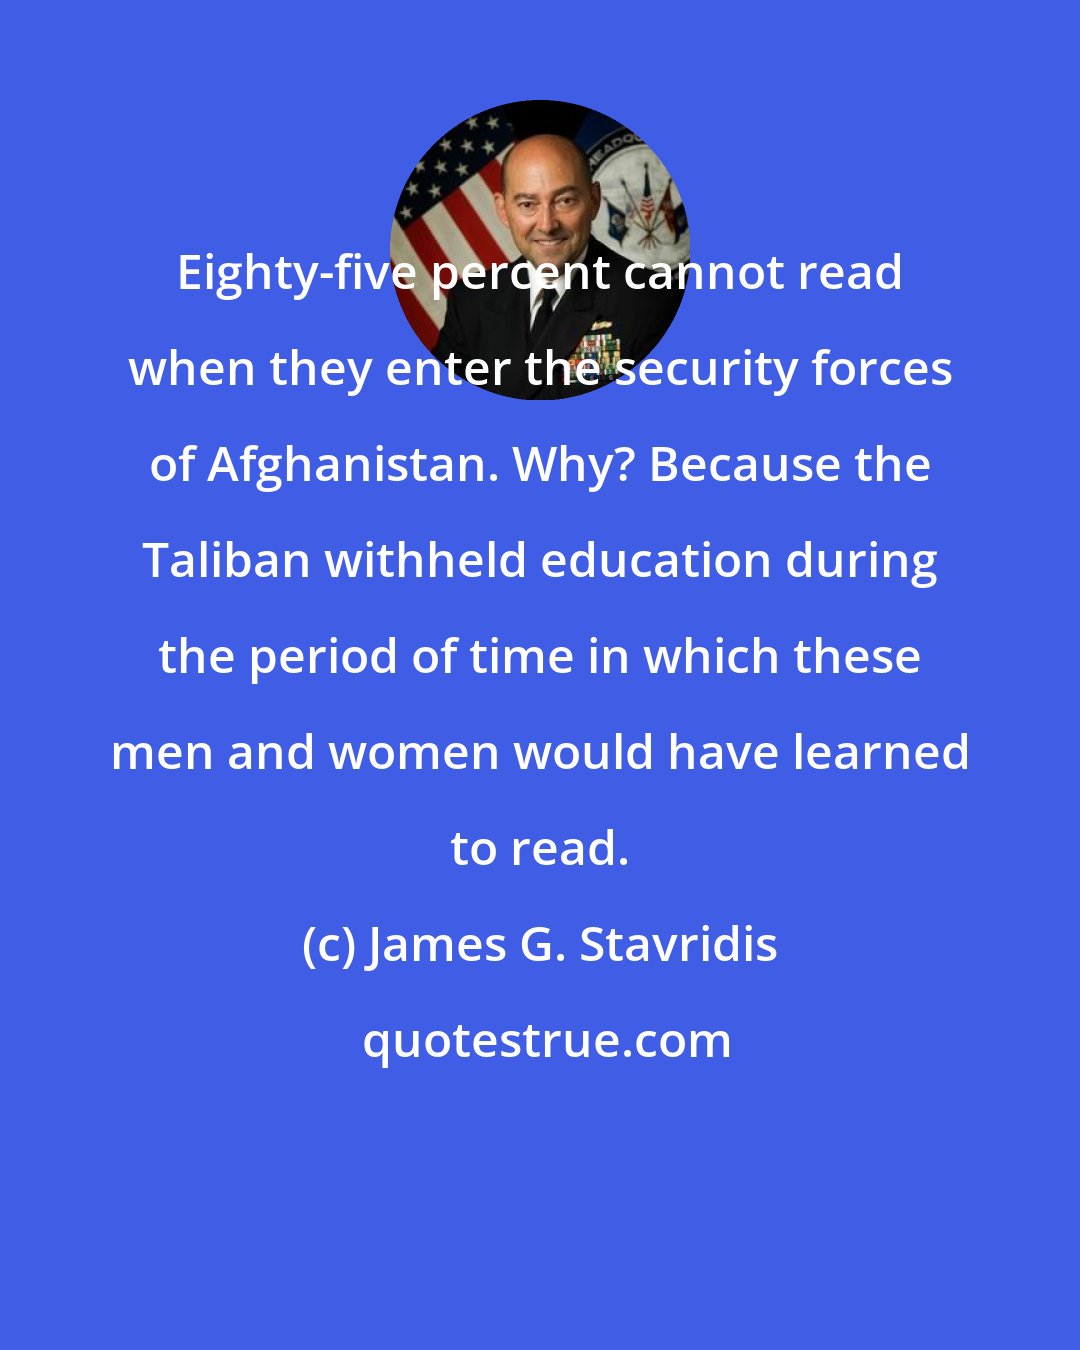 James G. Stavridis: Eighty-five percent cannot read when they enter the security forces of Afghanistan. Why? Because the Taliban withheld education during the period of time in which these men and women would have learned to read.